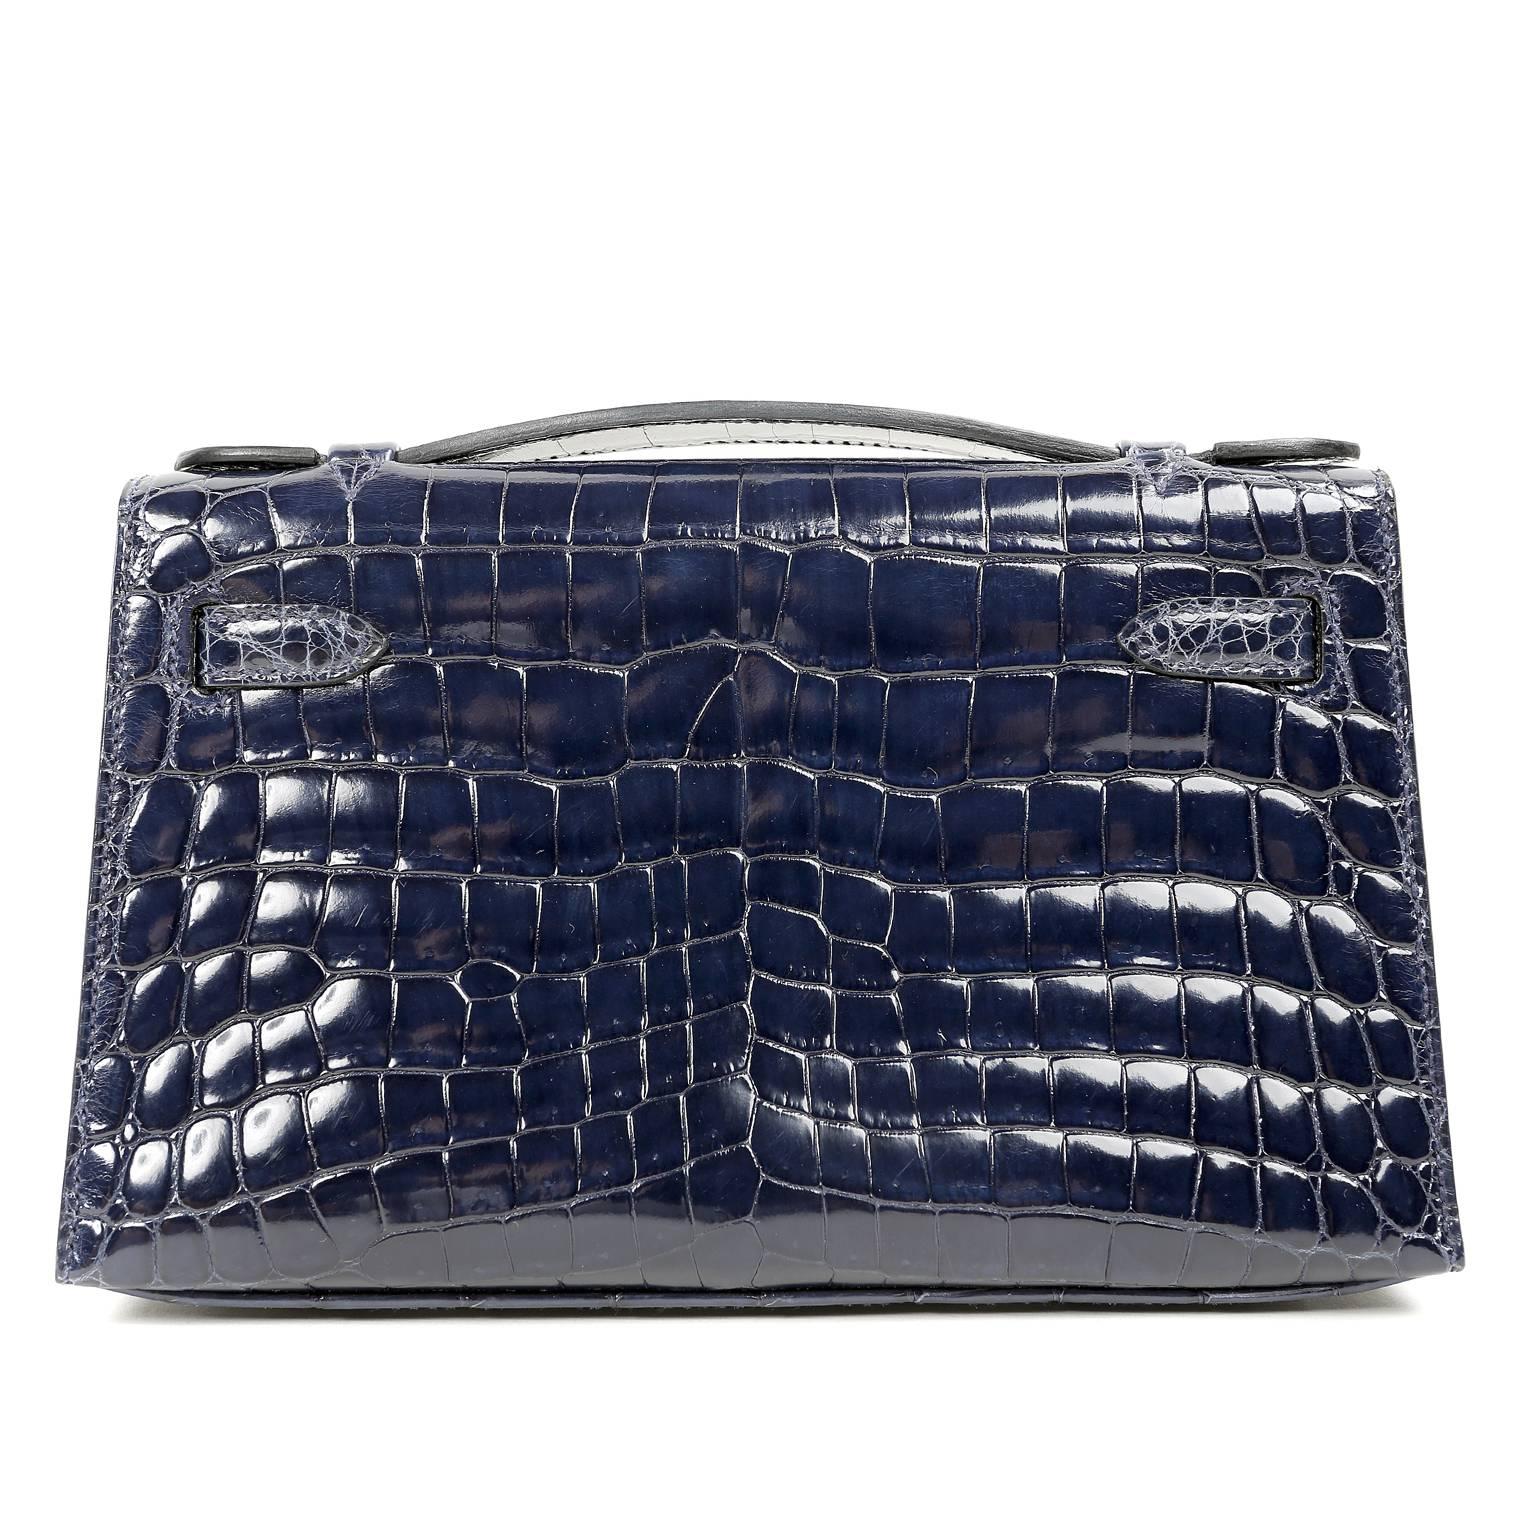 Hermès Blue Marine Niloticus Crocodile Kelly Pochette- NEW; NEver Carried  The protective plastic remains intact on the hardware. 
 Hermès bags are considered the ultimate luxury item worldwide.  Each piece is handcrafted with waitlists that can